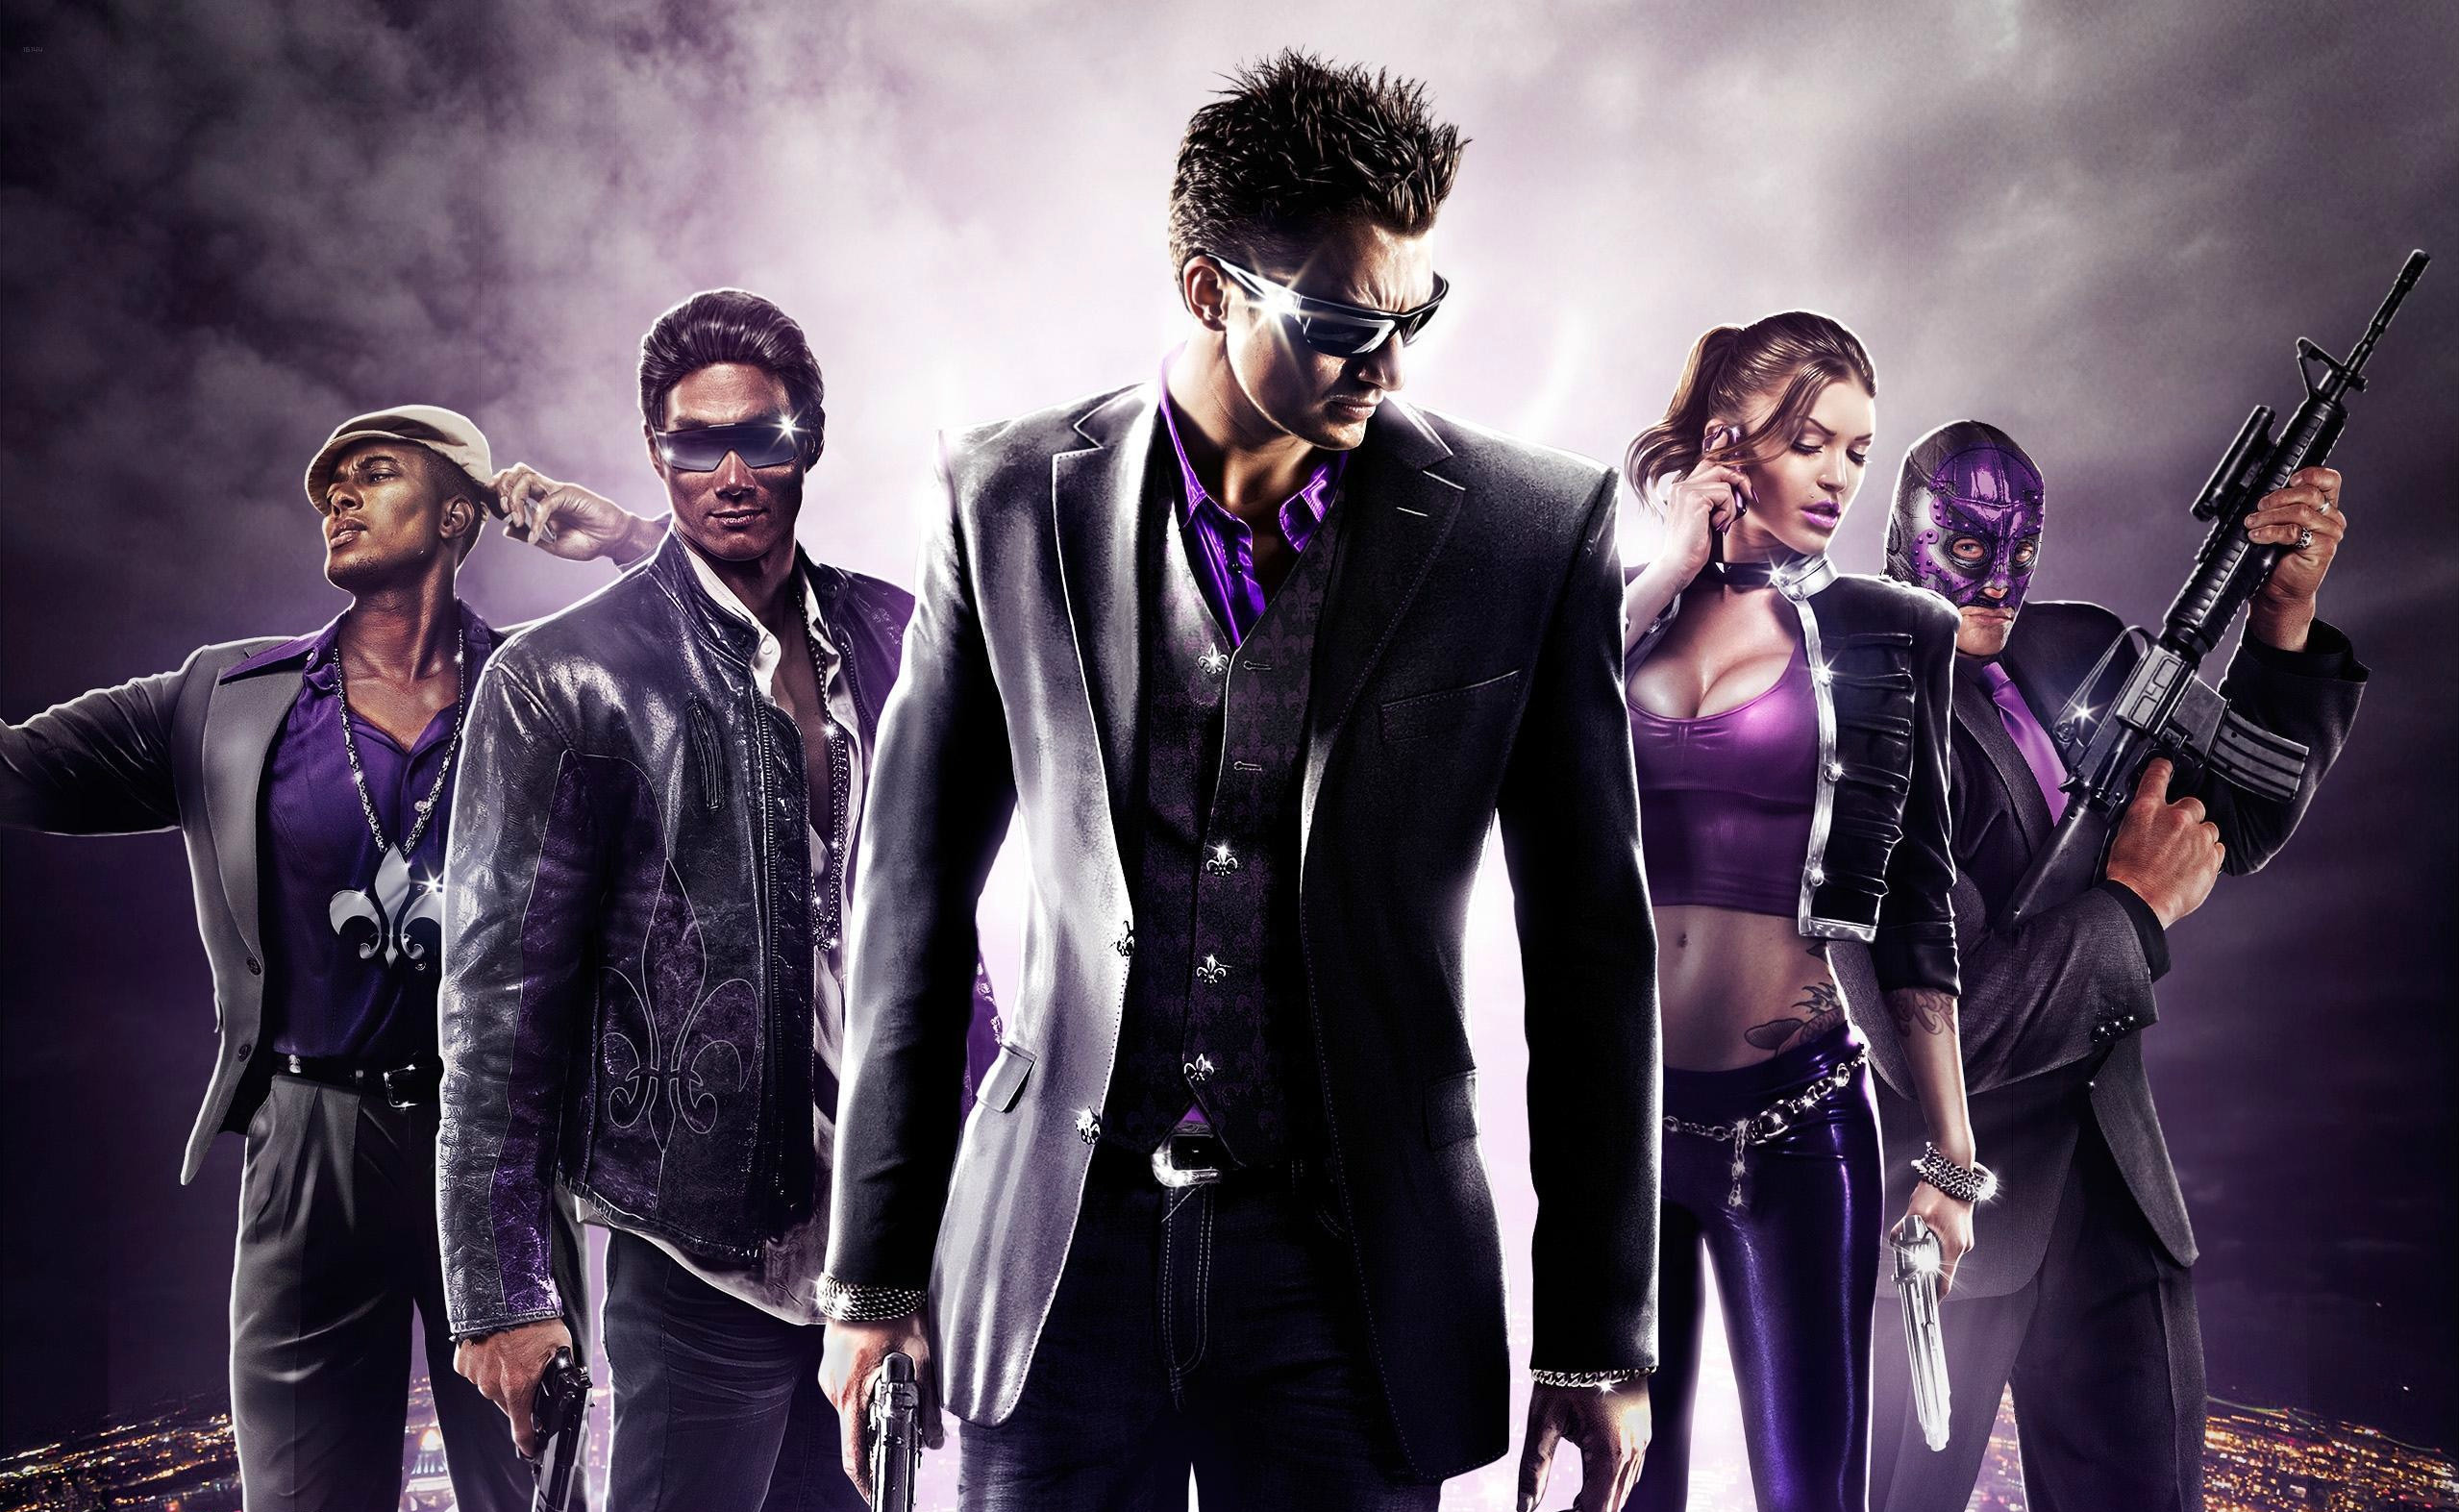 2558x1573 Pin by EAG2 on Saints Row | Pinterest | Saints row iv, Wallpaper and  Wallpaper backgrounds